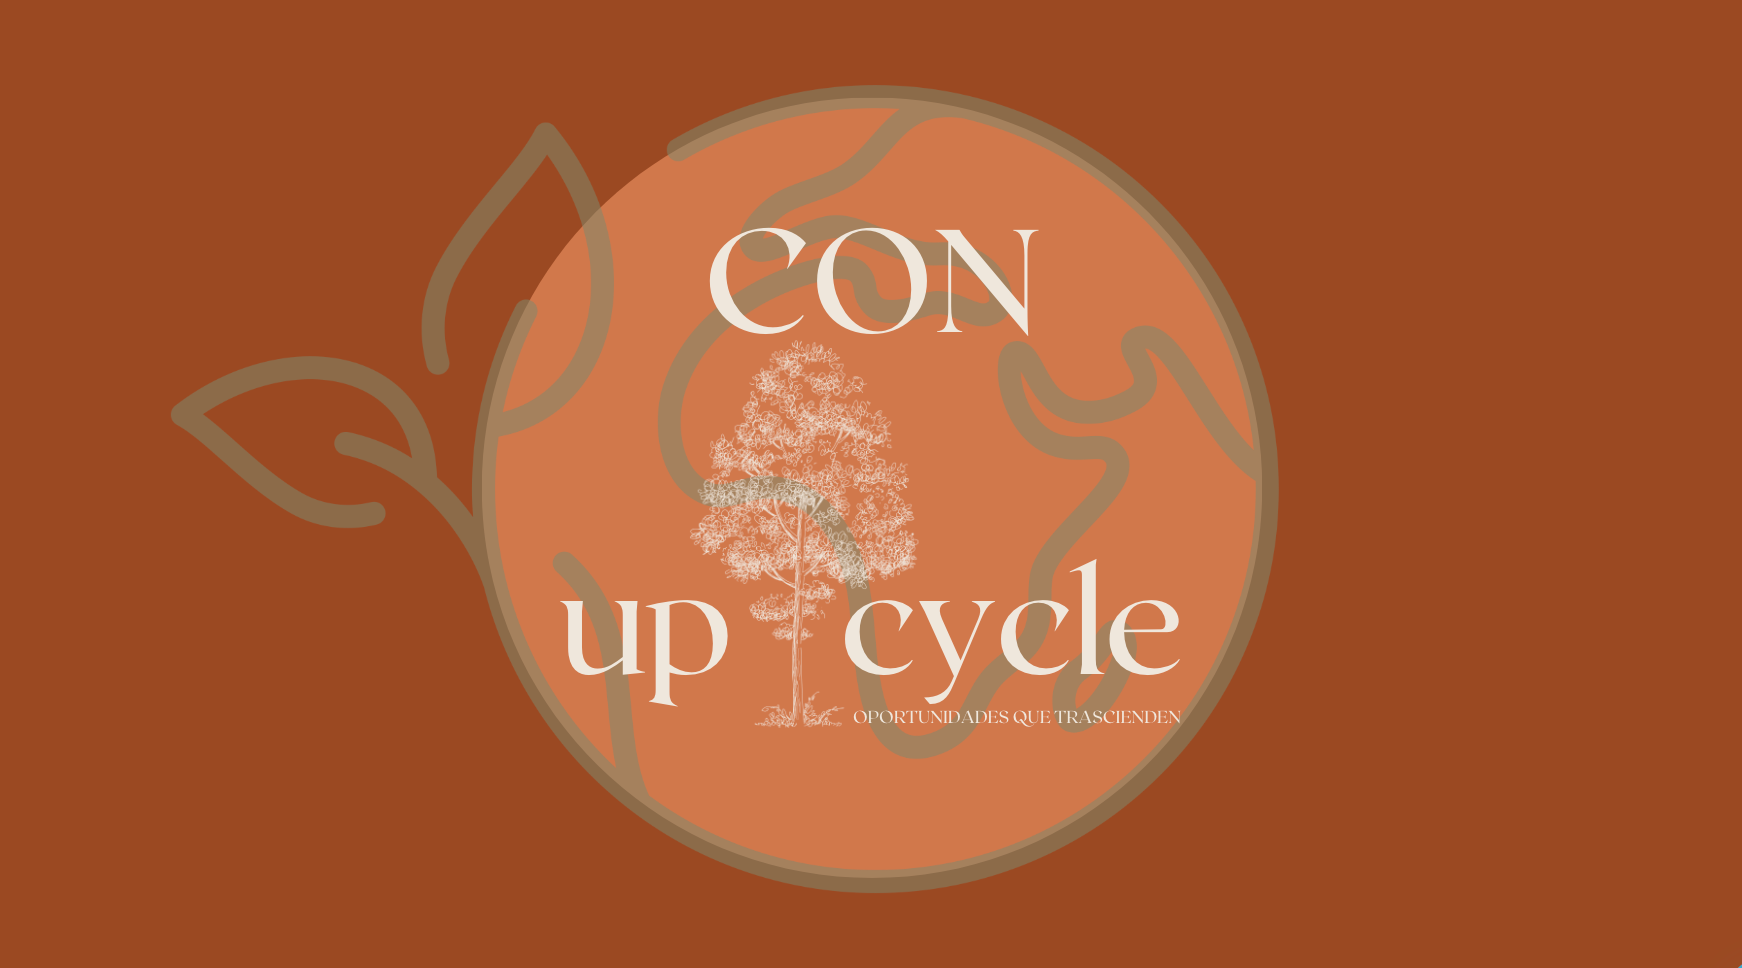 Cargar video: video of benefits of upcycle